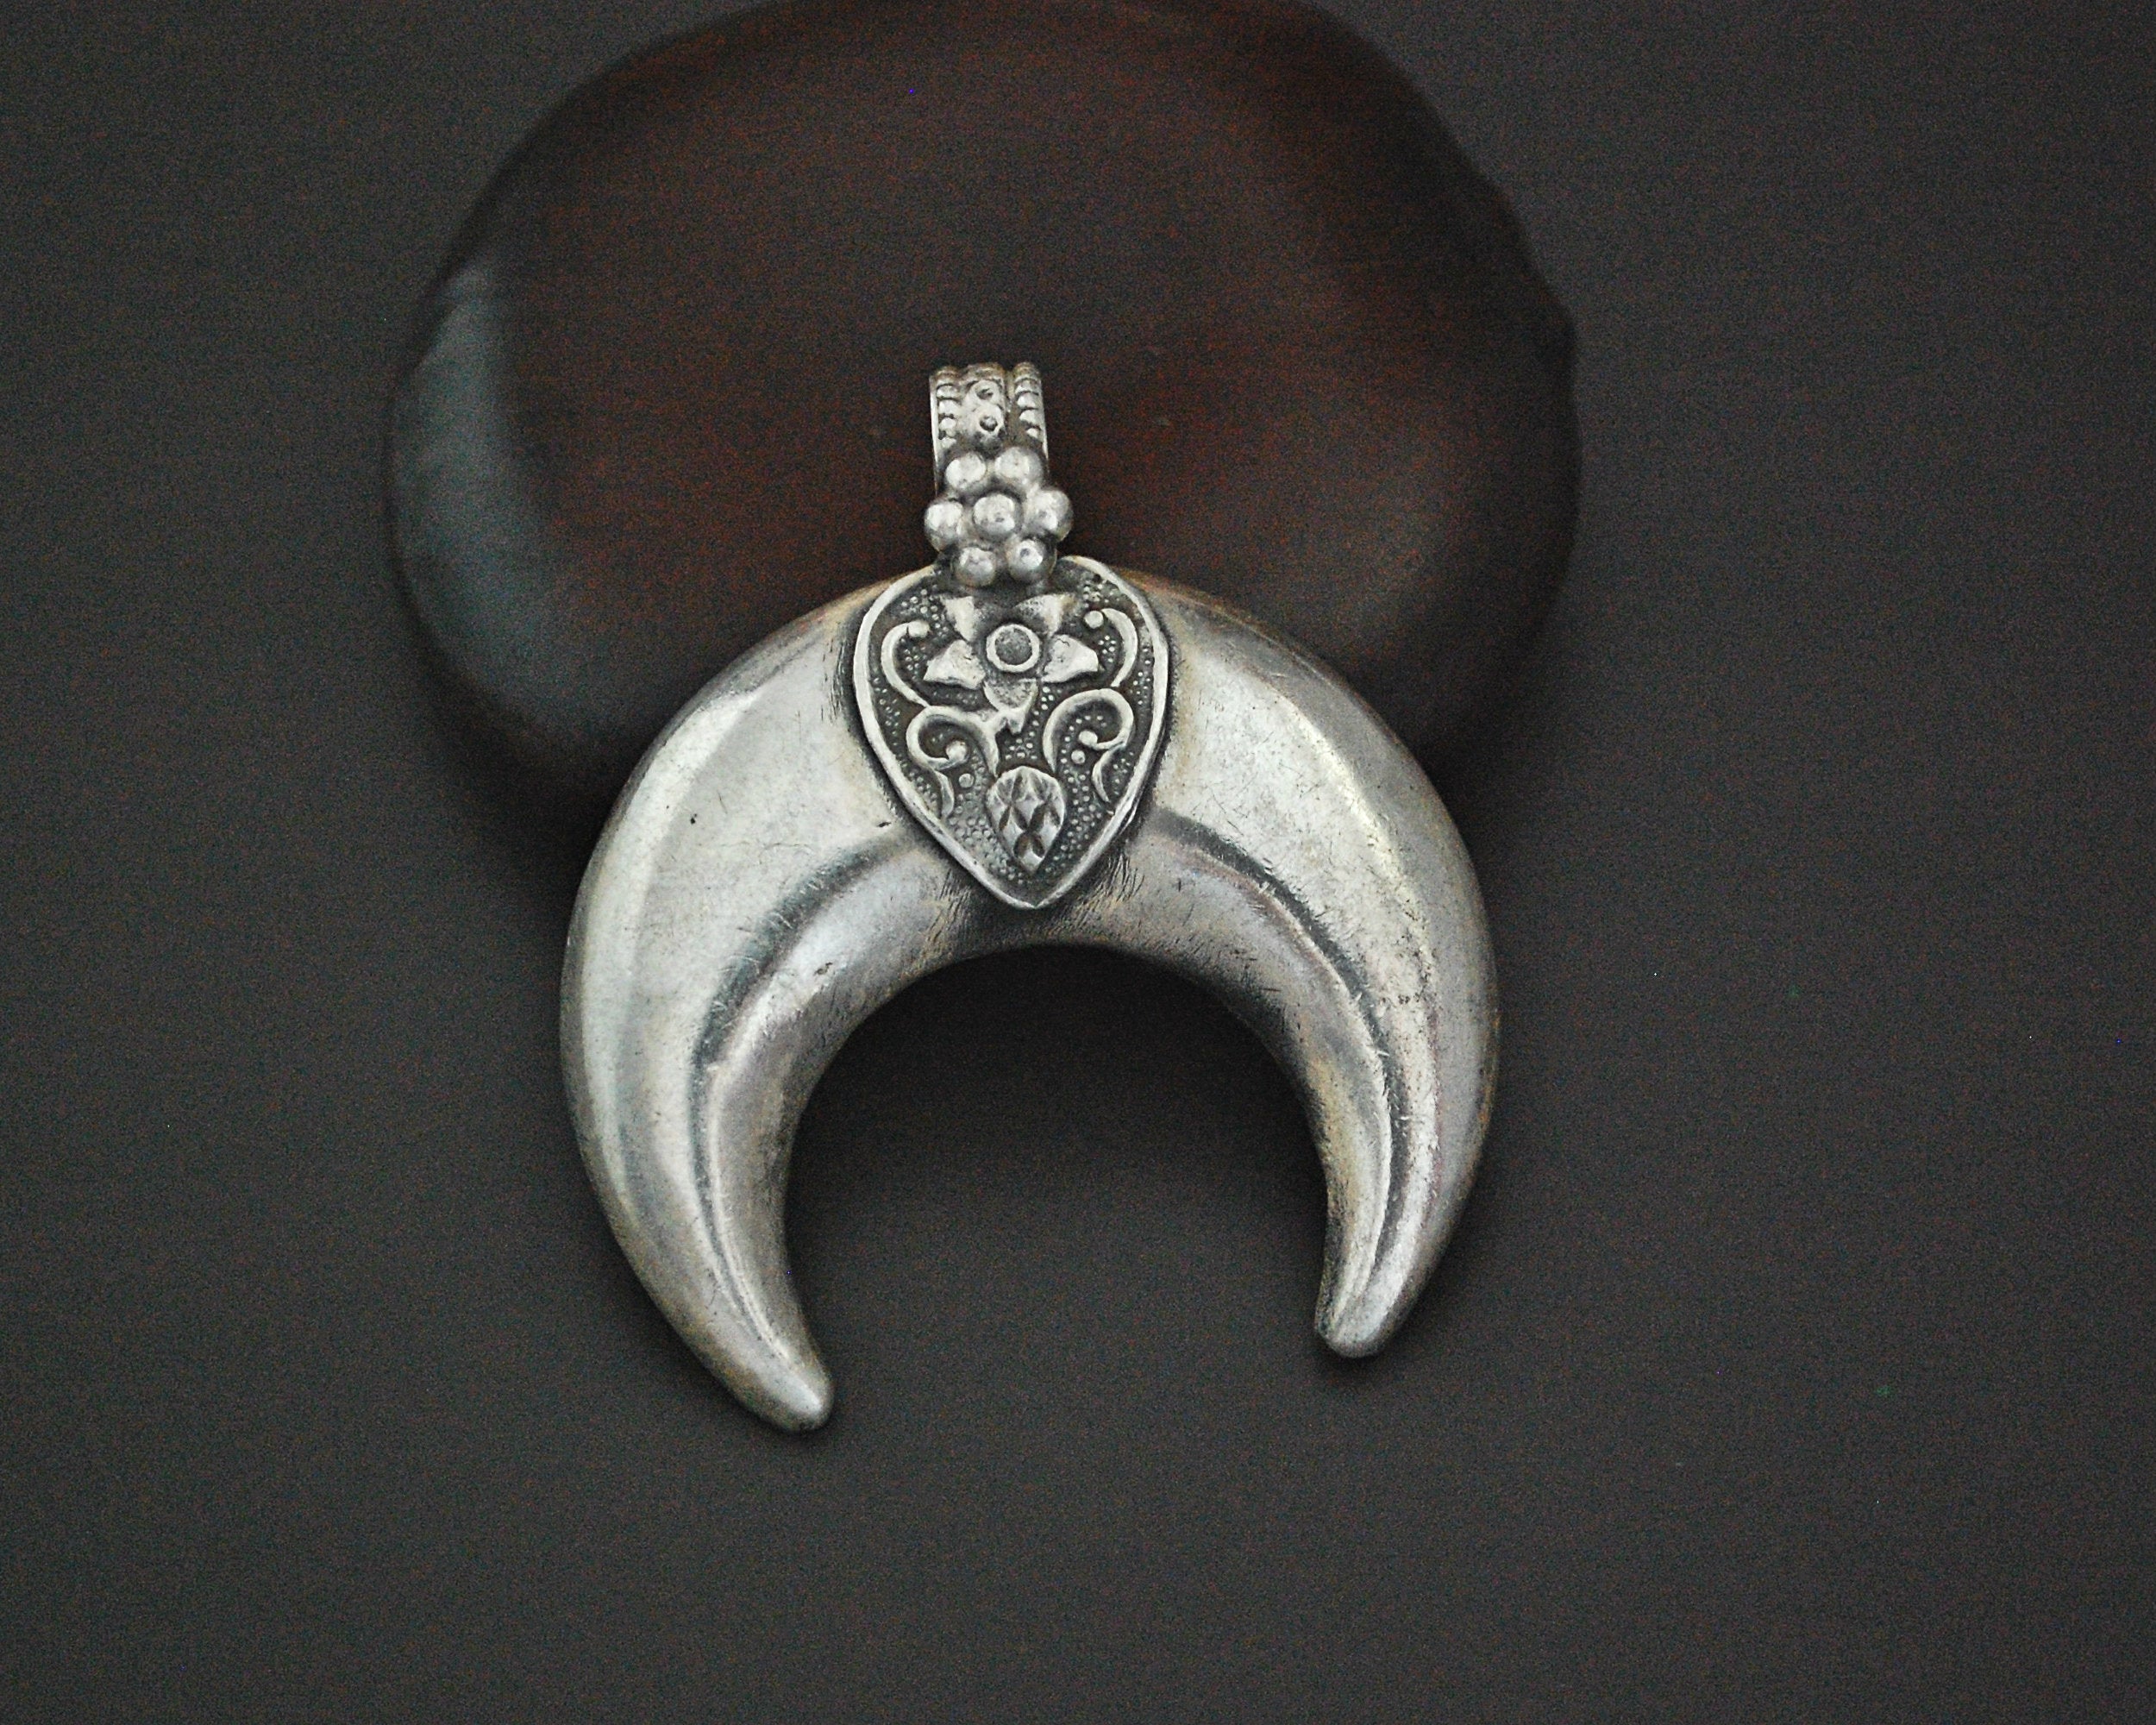 Indian Crescent Moon Pendant with Flower Ornament